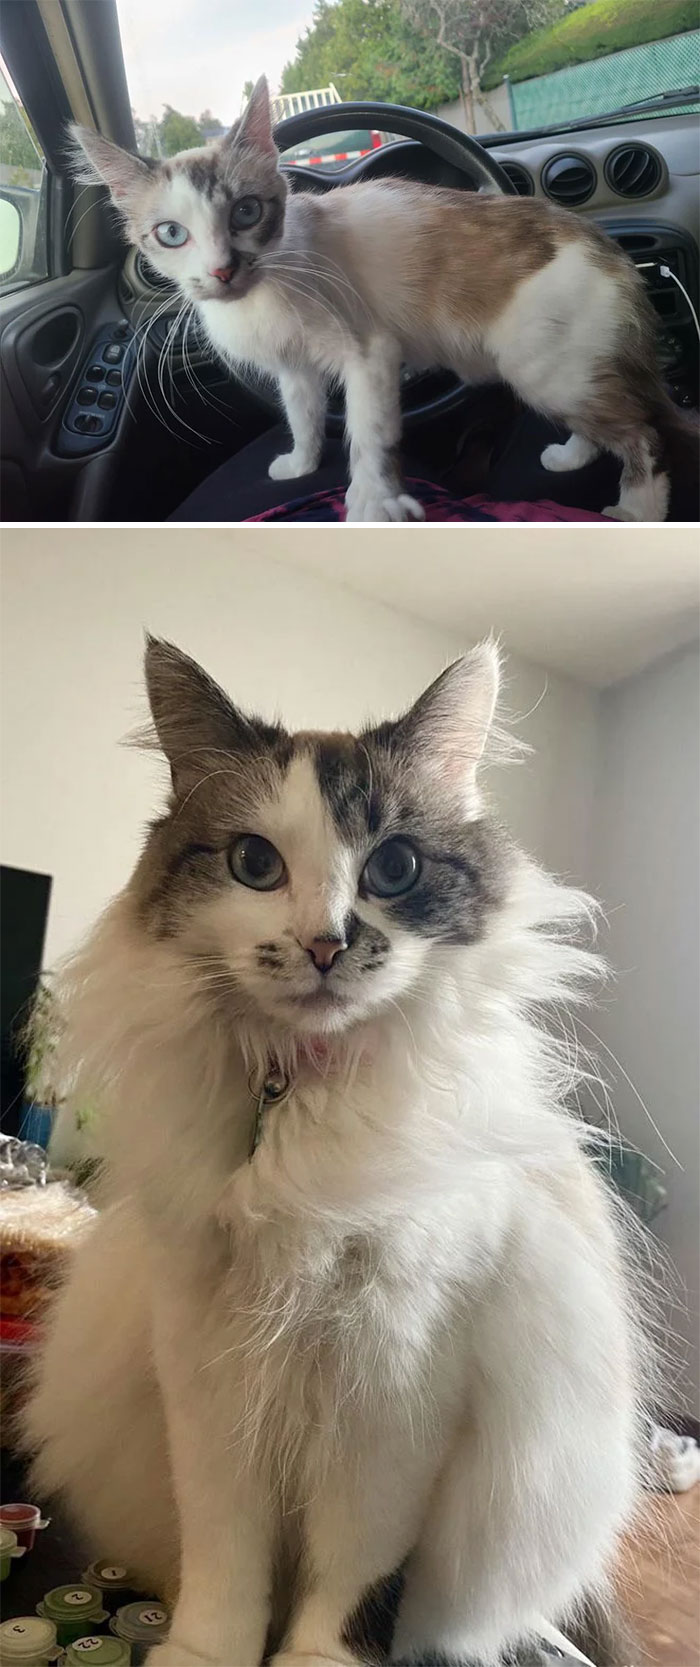 1 Year Update! Day 1 When We Rescued Her From A Trash Can, 1 Year Later She Suddenly Turned Into A Fluff Ball 🥰